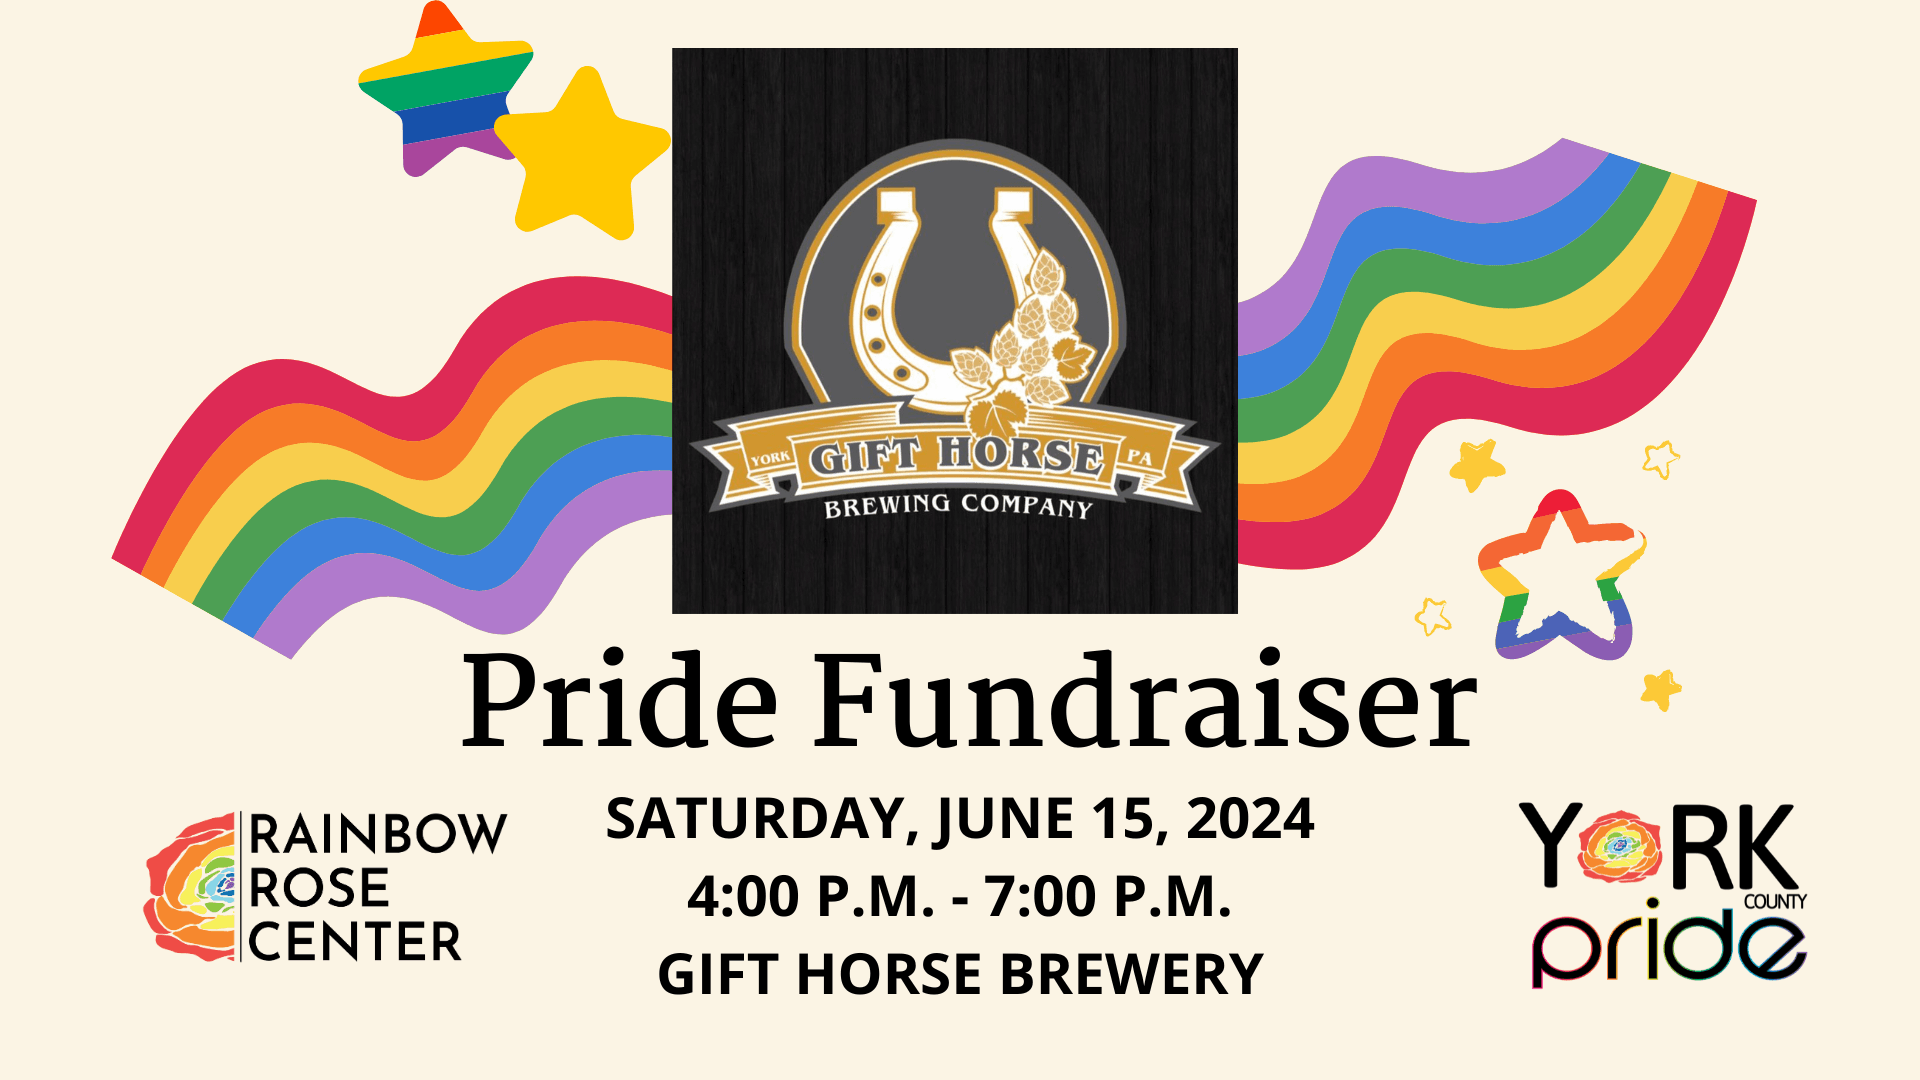 Gift Horse Brewing Company Fundraiser for Pride